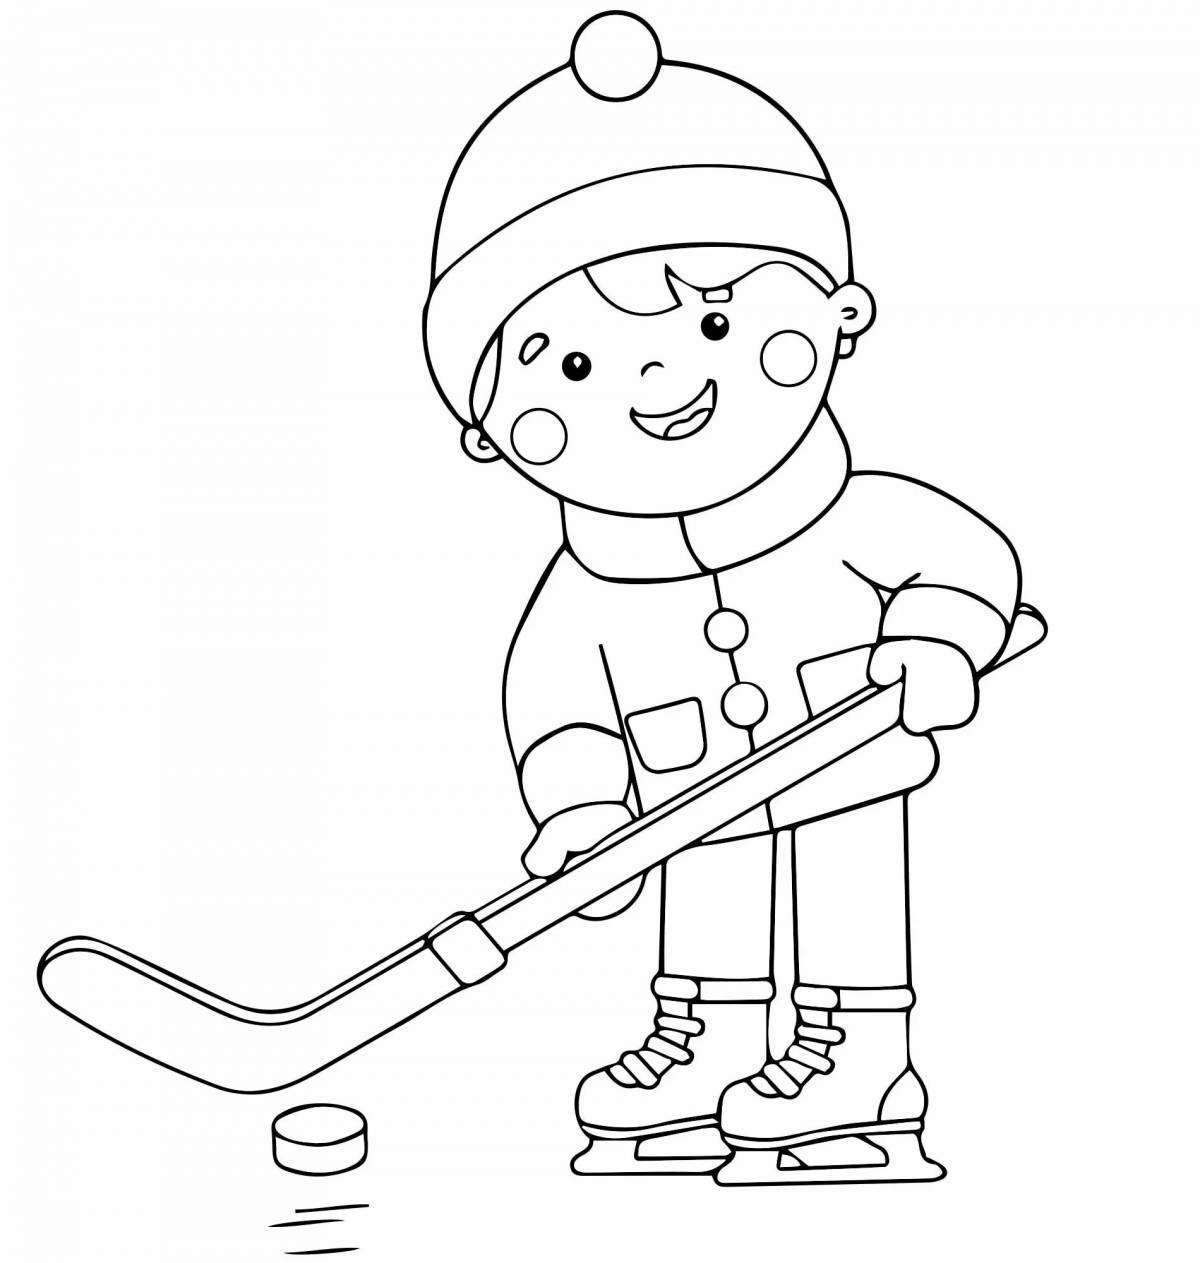 Snowy winter sports coloring page